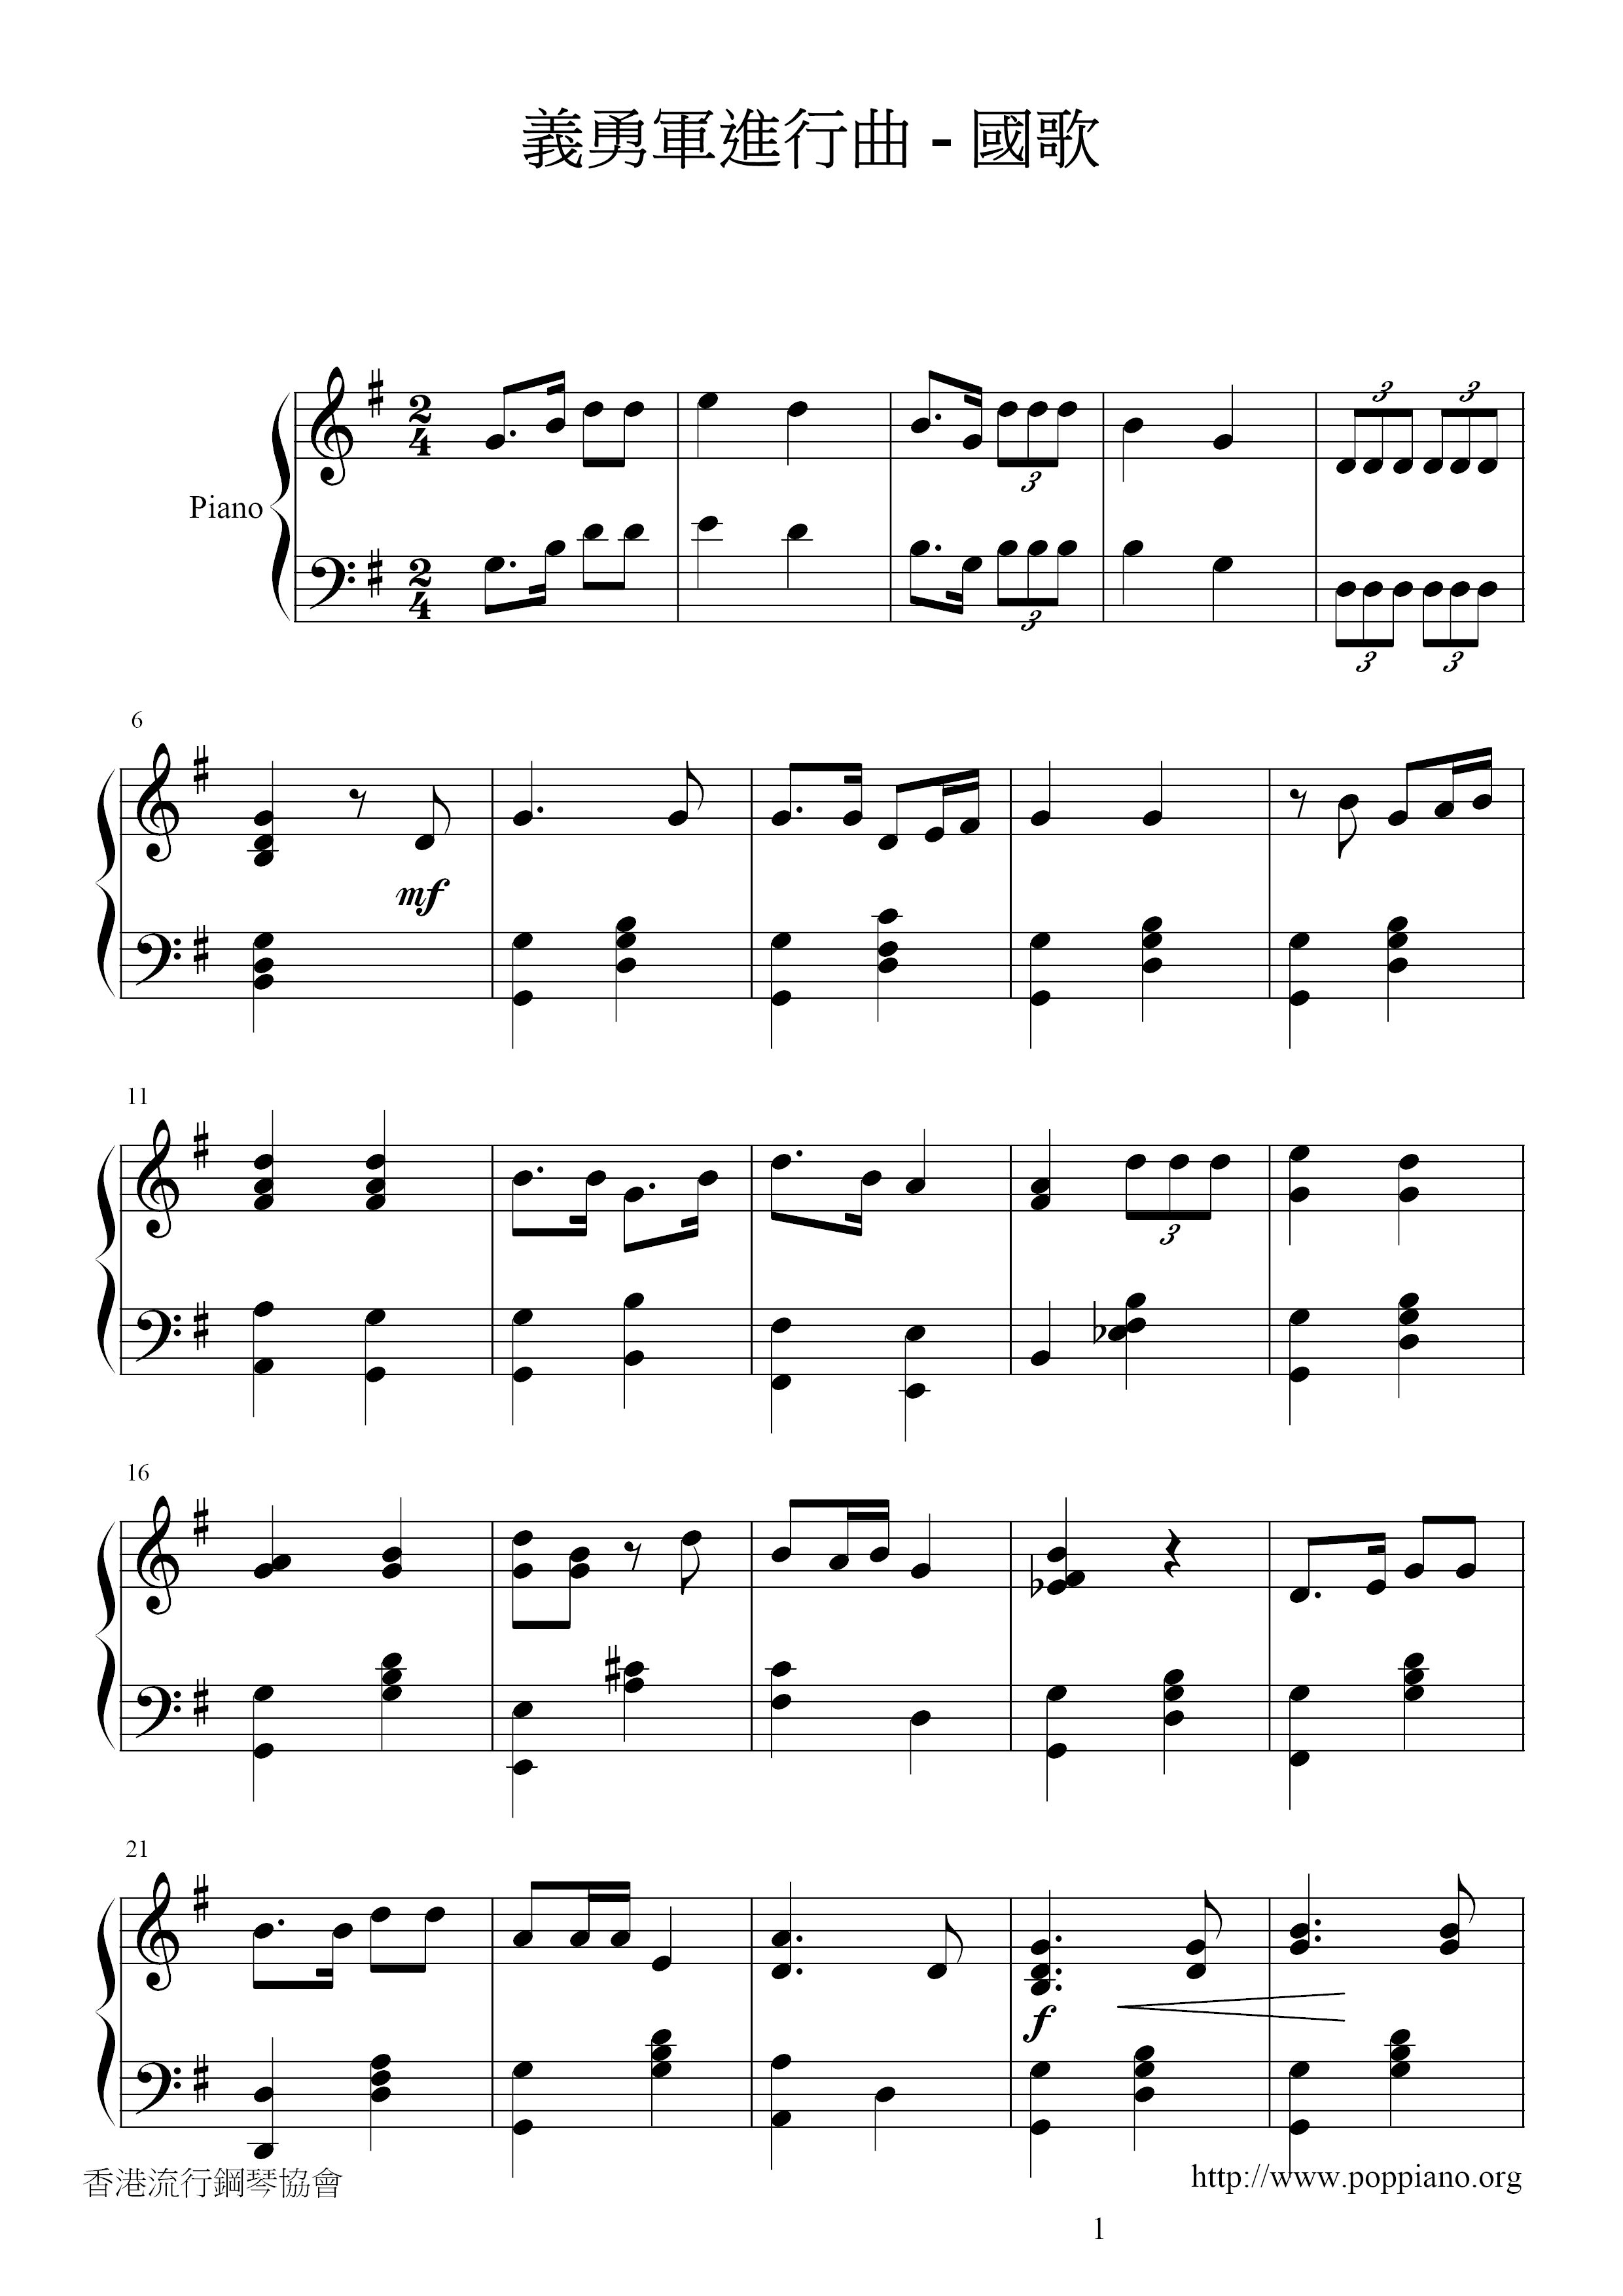 National Anthem Of The People's Republic Of China Score